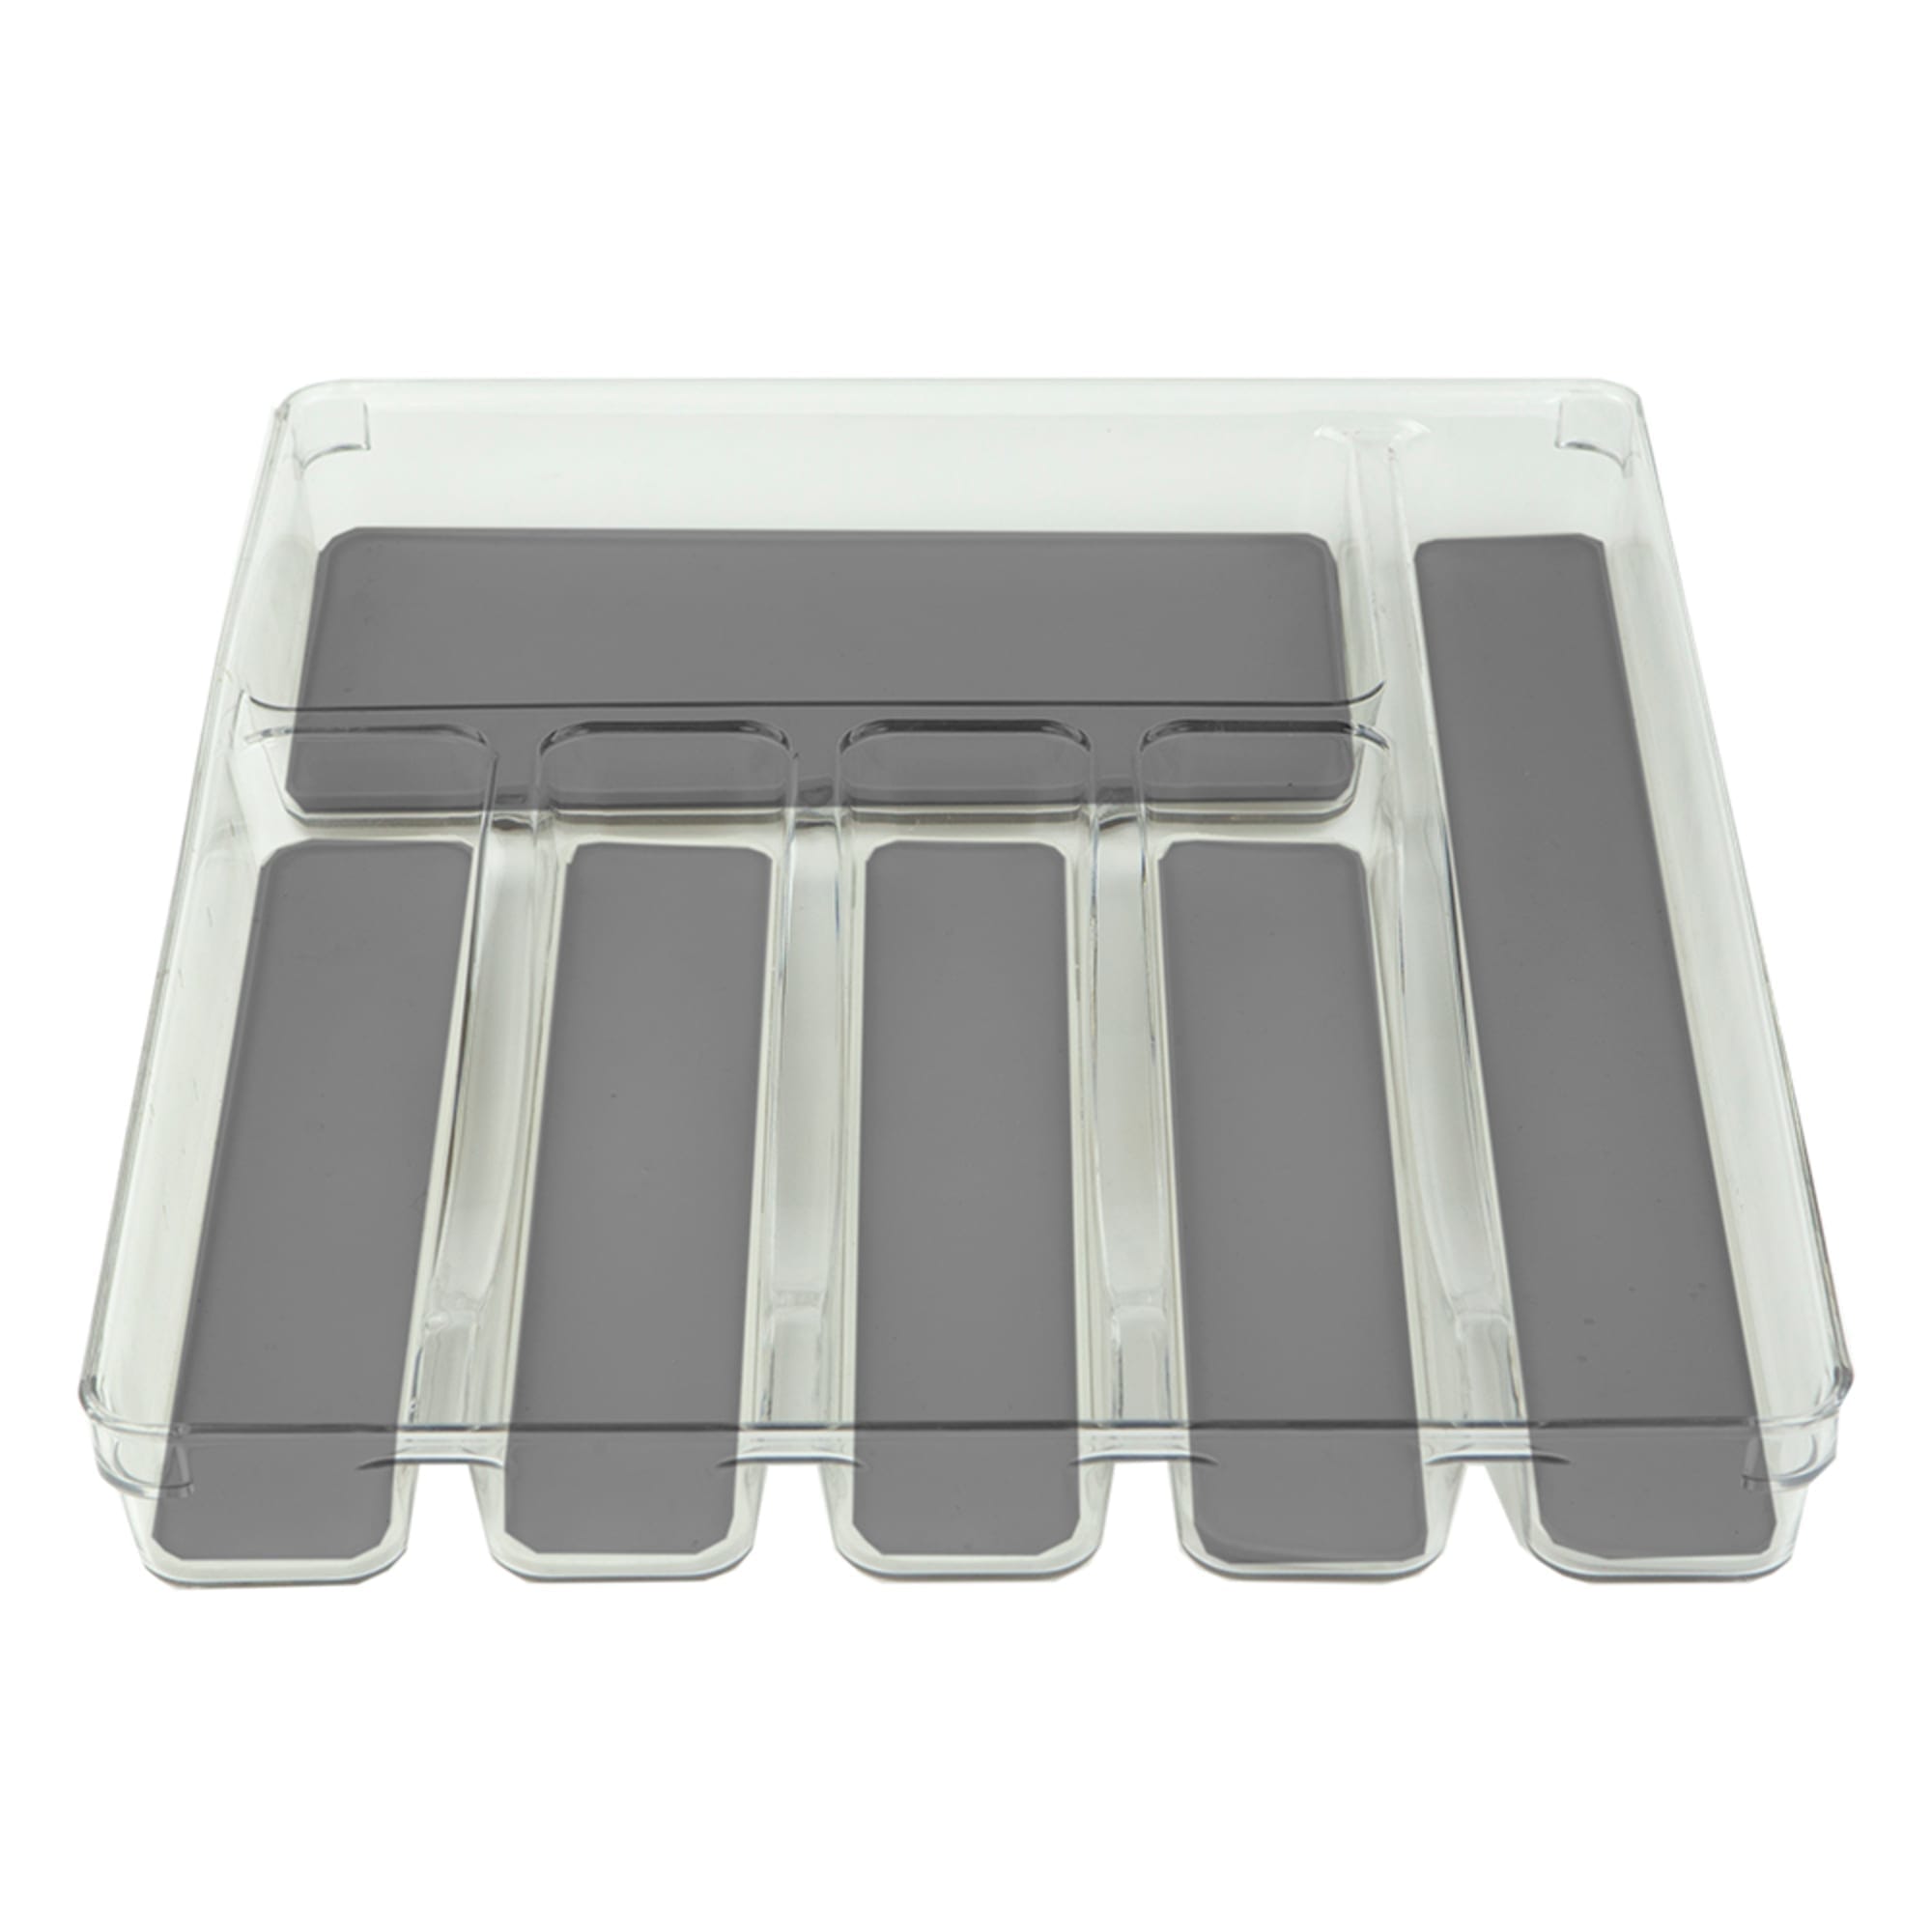 Home Basics 12" x 15" Plastic Drawer Organizer with Rubber Liner $8.00 EACH, CASE PACK OF 12